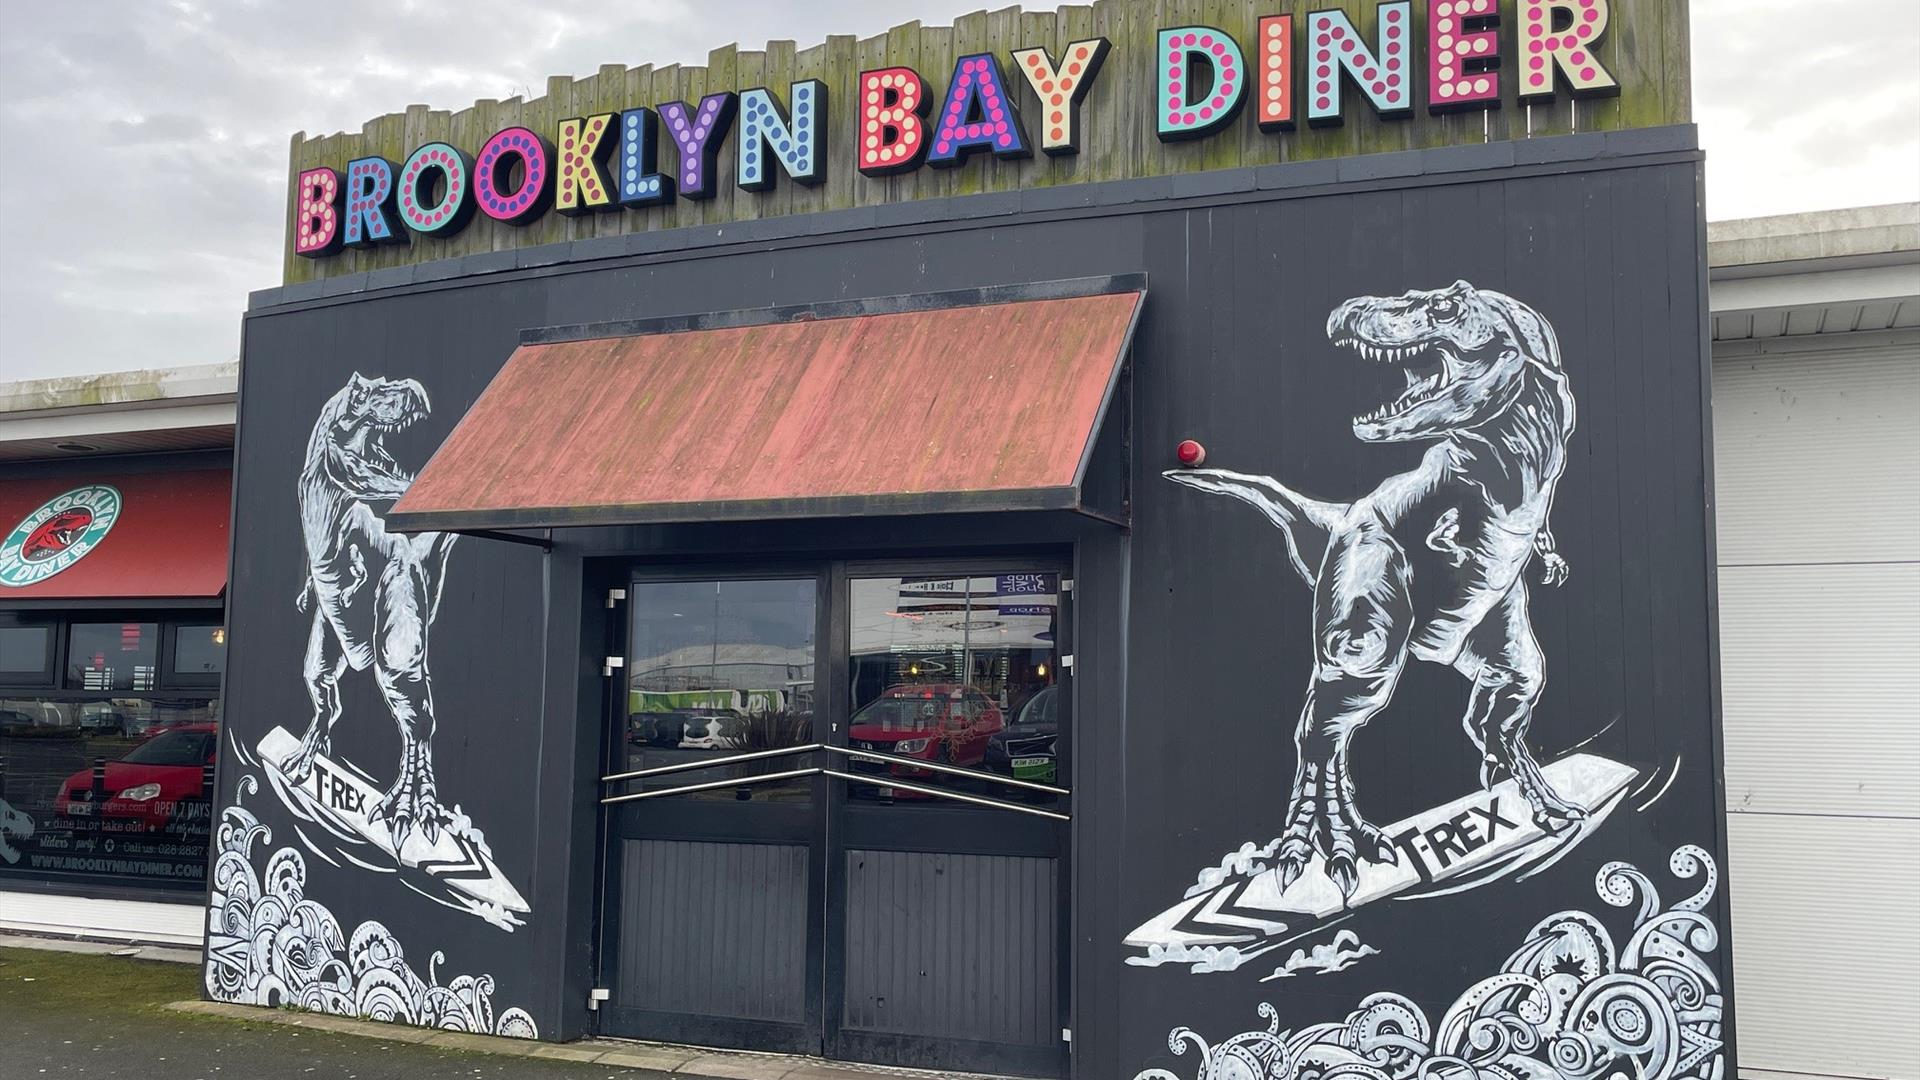 Exterior of Brooklyn Bay Diner entrance with large sign, door canopy and dinosaur wall murals